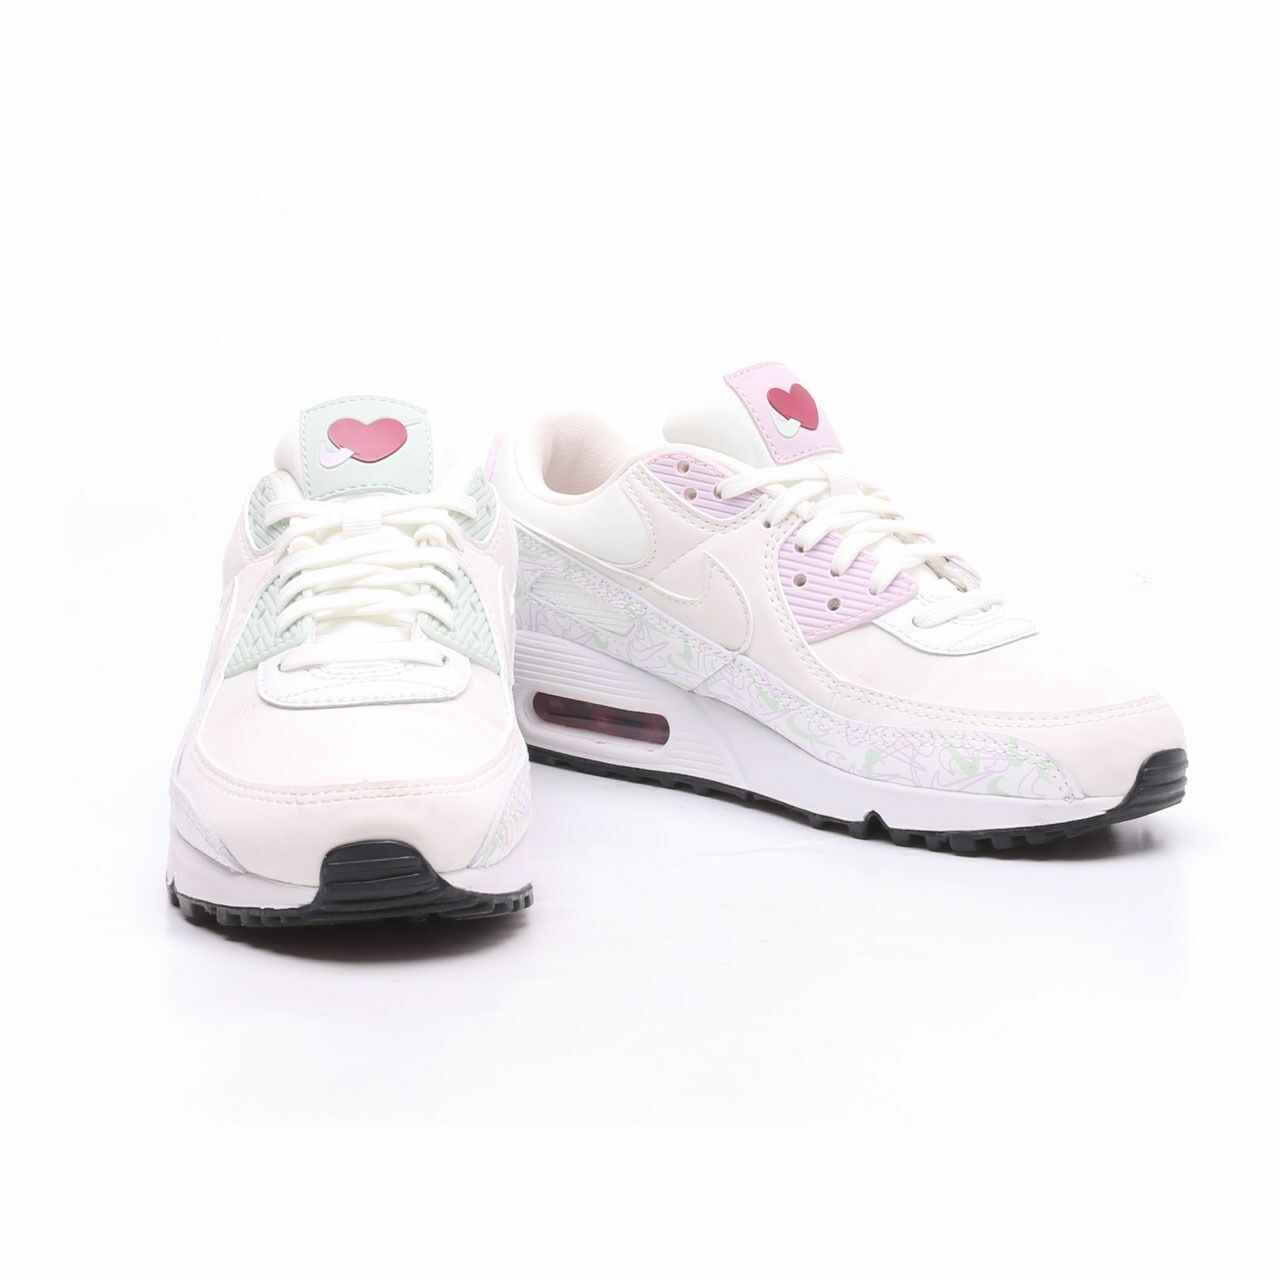 Nike White Air Max 90 Vday Sneakers